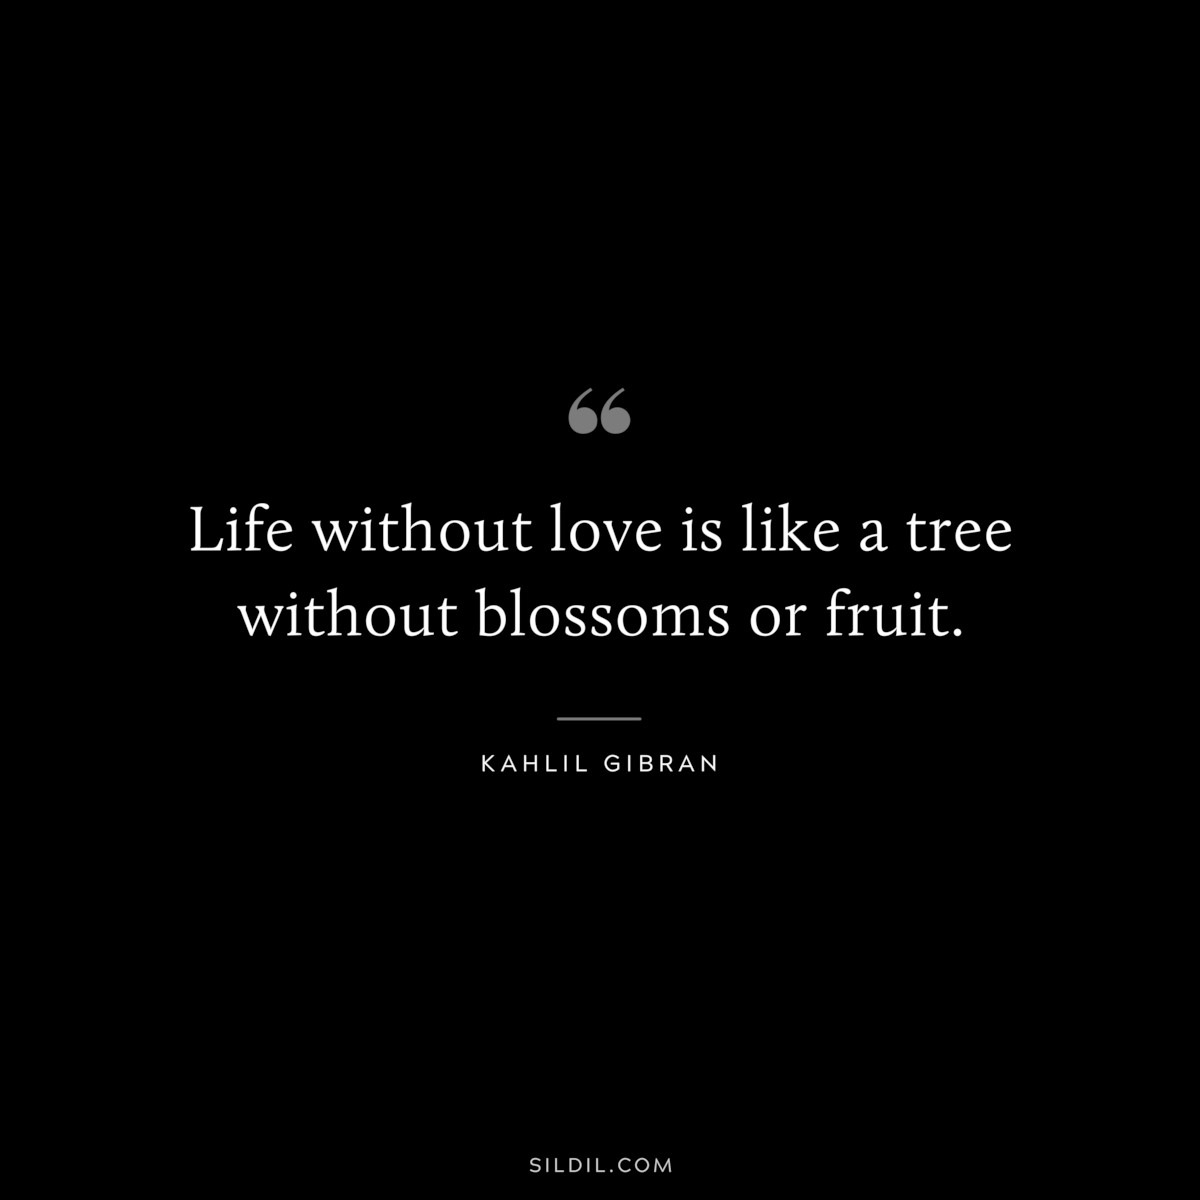 Life without love is like a tree without blossoms or fruit. ― Kahlil Gibran